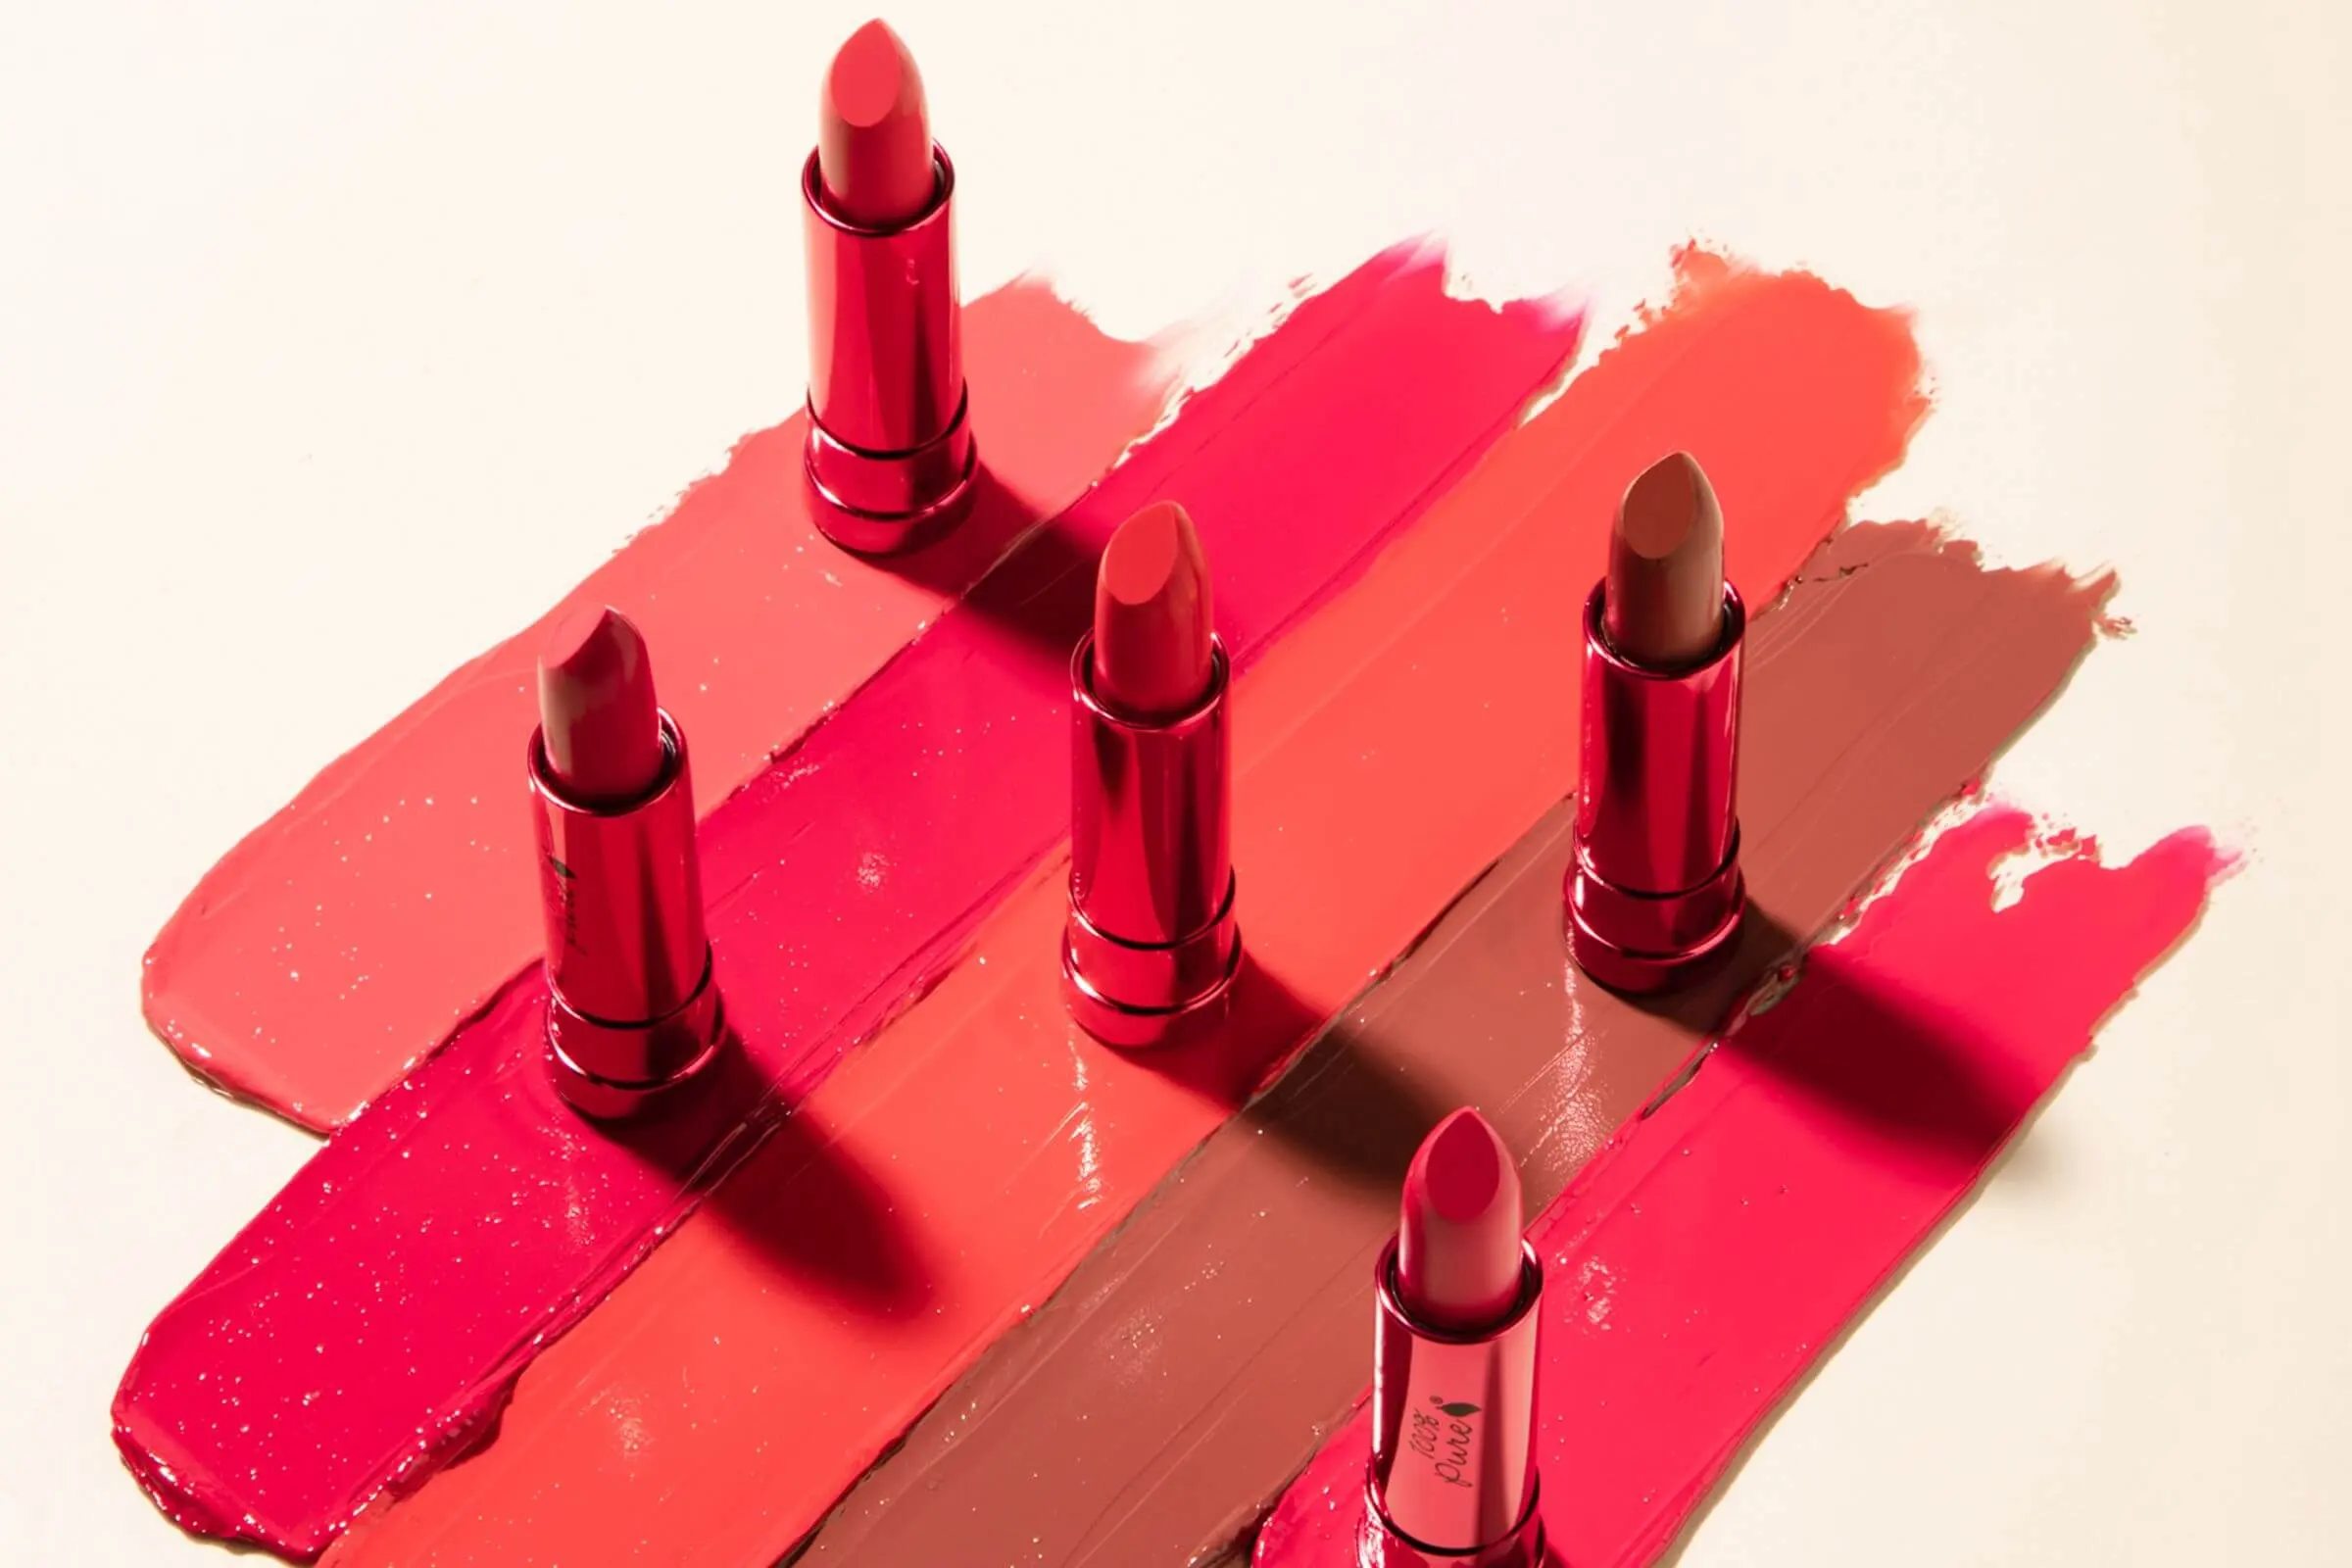 Cover Photo 100 Pure How To Choose The Best Lipstick For Your Skintone.jpg 100% Pure Singapore